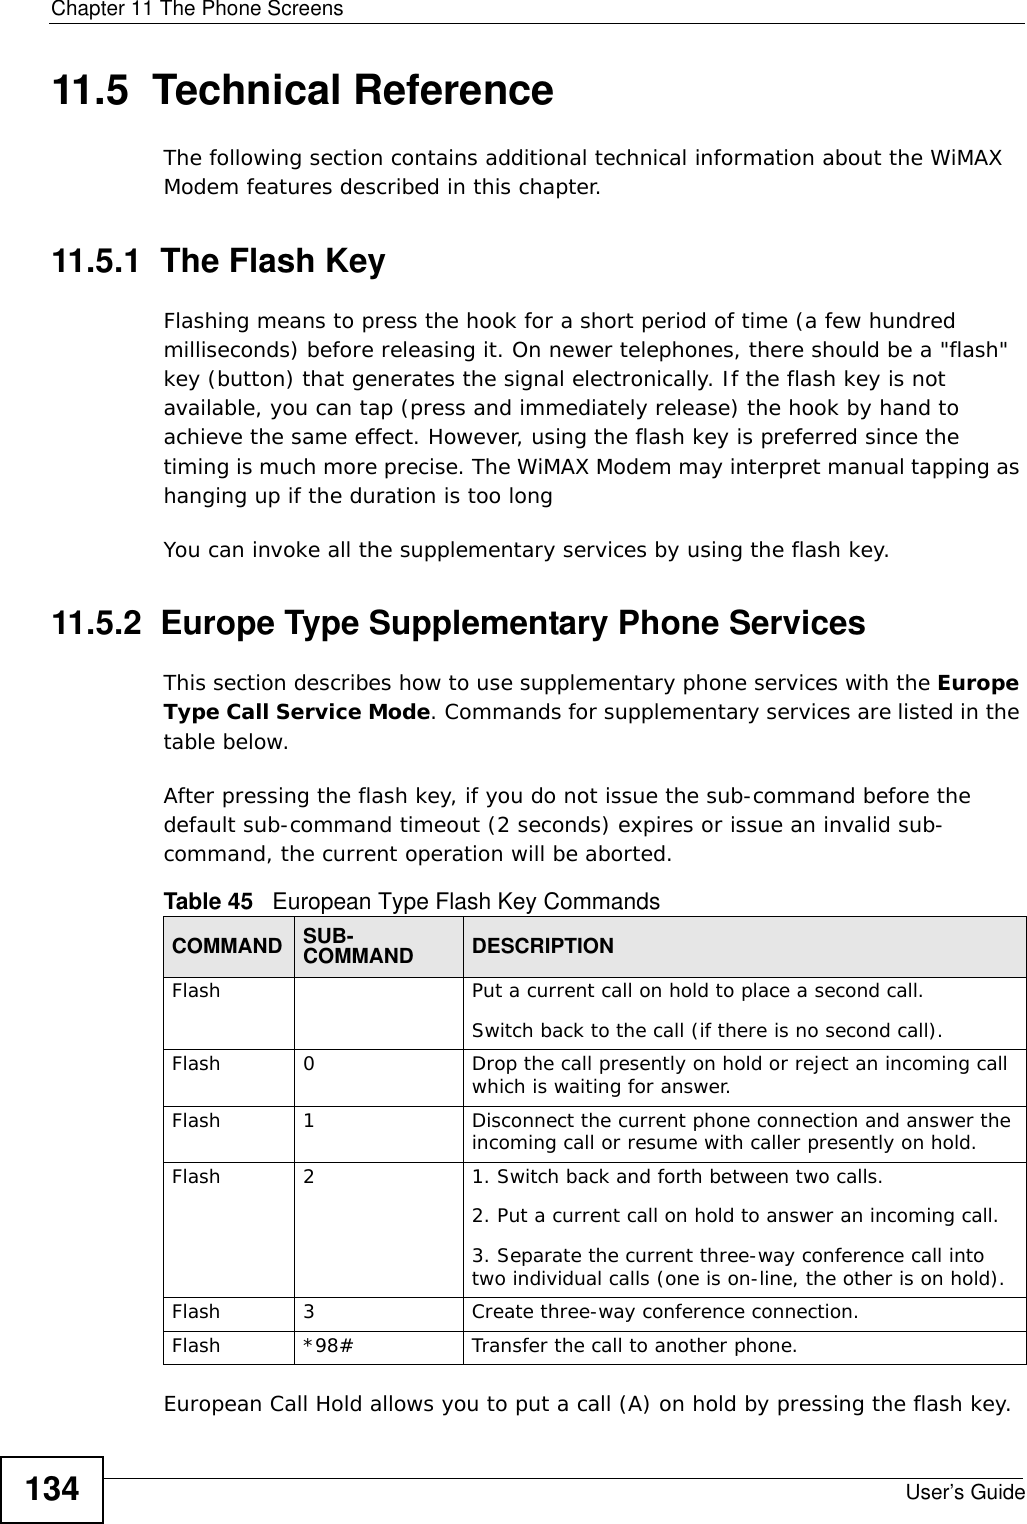 Chapter 11 The Phone ScreensUser’s Guide13411.5  Technical ReferenceThe following section contains additional technical information about the WiMAX Modem features described in this chapter.11.5.1  The Flash KeyFlashing means to press the hook for a short period of time (a few hundred milliseconds) before releasing it. On newer telephones, there should be a &quot;flash&quot; key (button) that generates the signal electronically. If the flash key is not available, you can tap (press and immediately release) the hook by hand to achieve the same effect. However, using the flash key is preferred since the timing is much more precise. The WiMAX Modem may interpret manual tapping as hanging up if the duration is too longYou can invoke all the supplementary services by using the flash key. 11.5.2  Europe Type Supplementary Phone ServicesThis section describes how to use supplementary phone services with the Europe Type Call Service Mode. Commands for supplementary services are listed in the table below.After pressing the flash key, if you do not issue the sub-command before the default sub-command timeout (2 seconds) expires or issue an invalid sub-command, the current operation will be aborted.European Call Hold allows you to put a call (A) on hold by pressing the flash key. Table 45   European Type Flash Key CommandsCOMMAND SUB-COMMAND DESCRIPTIONFlash  Put a current call on hold to place a second call.Switch back to the call (if there is no second call).Flash 0 Drop the call presently on hold or reject an incoming call which is waiting for answer.Flash 1 Disconnect the current phone connection and answer the incoming call or resume with caller presently on hold.Flash 2 1. Switch back and forth between two calls.2. Put a current call on hold to answer an incoming call.3. Separate the current three-way conference call into two individual calls (one is on-line, the other is on hold).Flash 3 Create three-way conference connection.Flash  *98# Transfer the call to another phone.